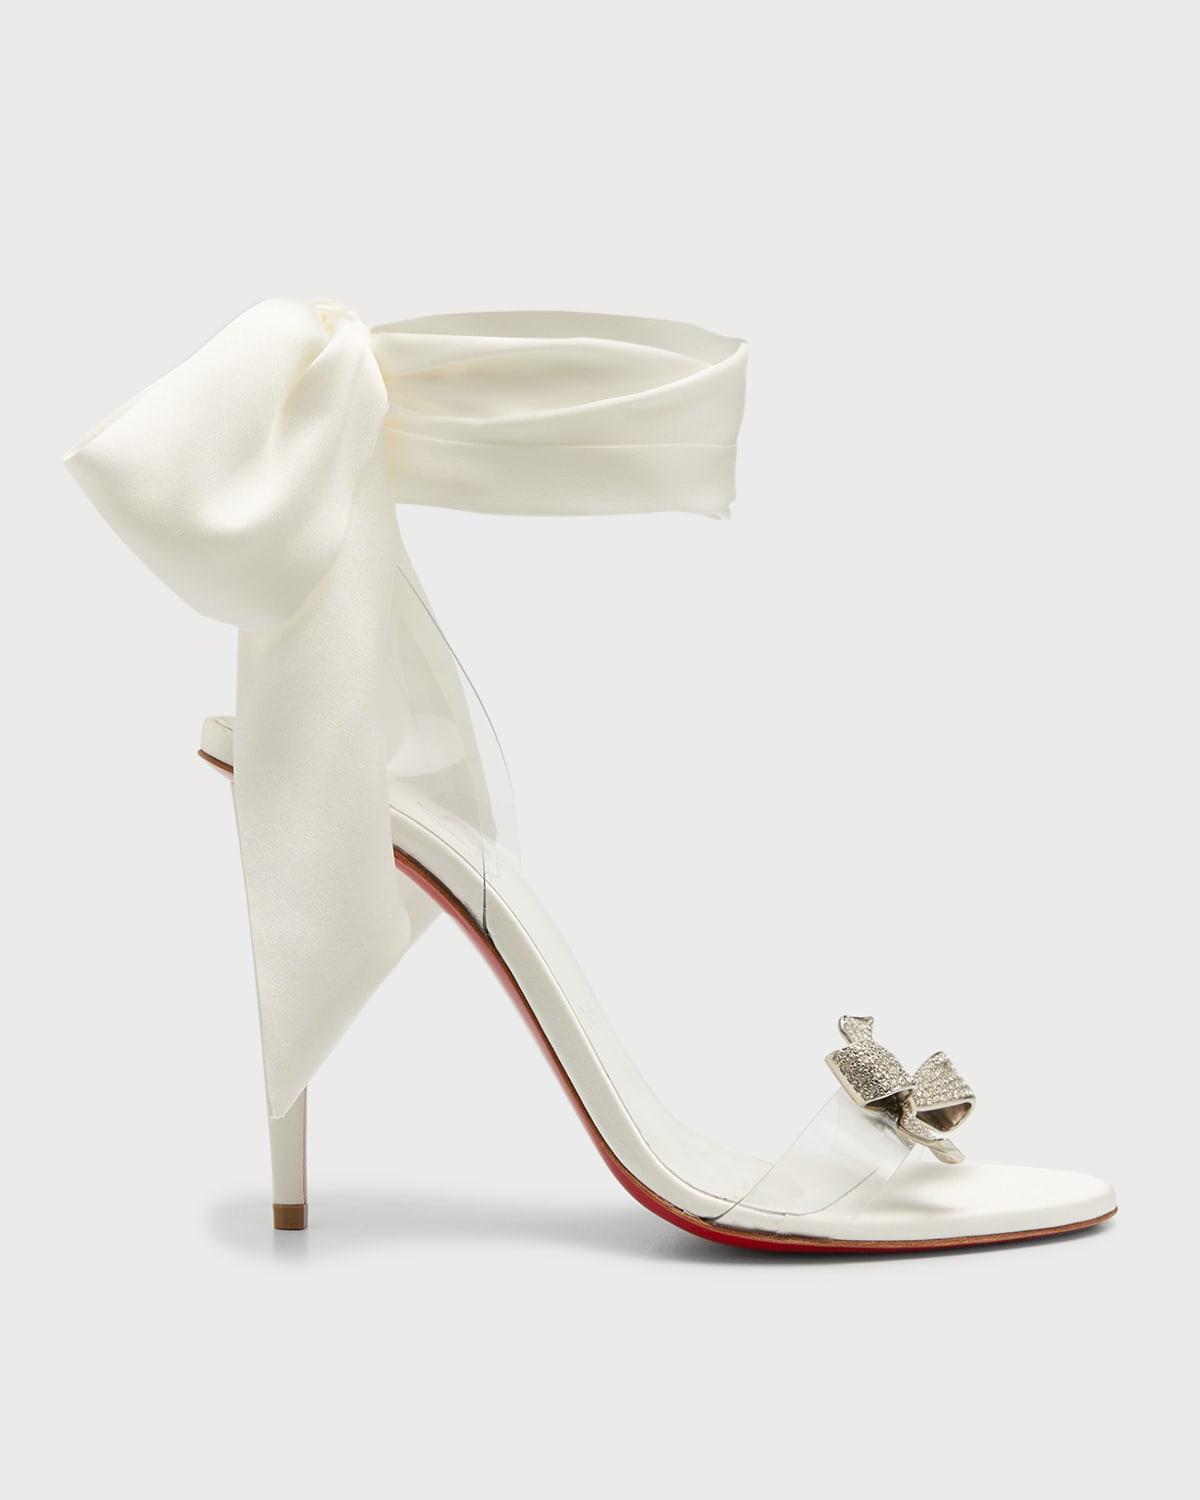 Christian Louboutin Crystal Bow Silk-tie Red Sole Sandals in White | Lyst